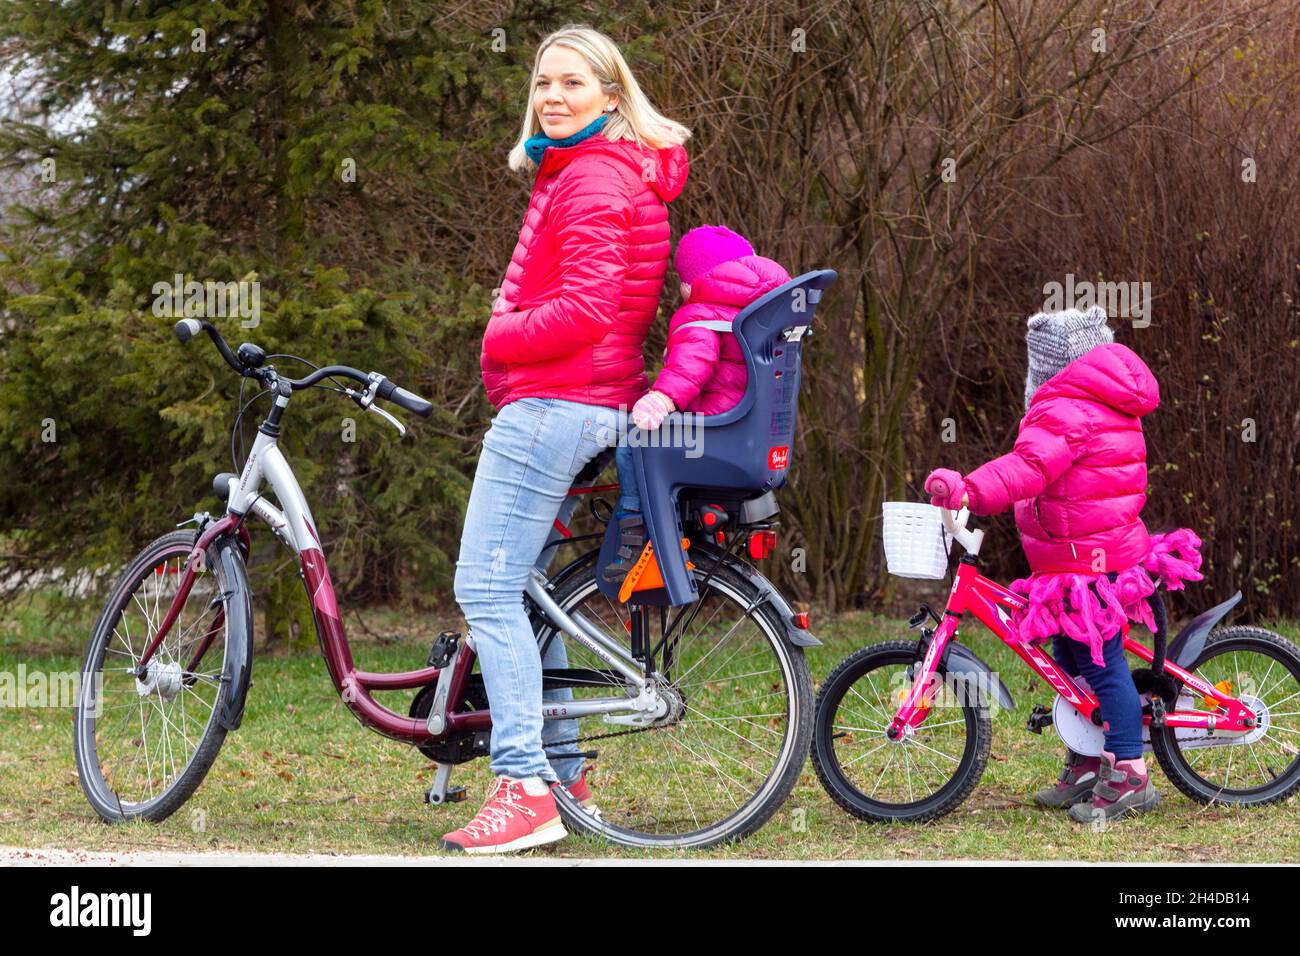 Child in bike seat Woman on bicycle and two children Stock Photo